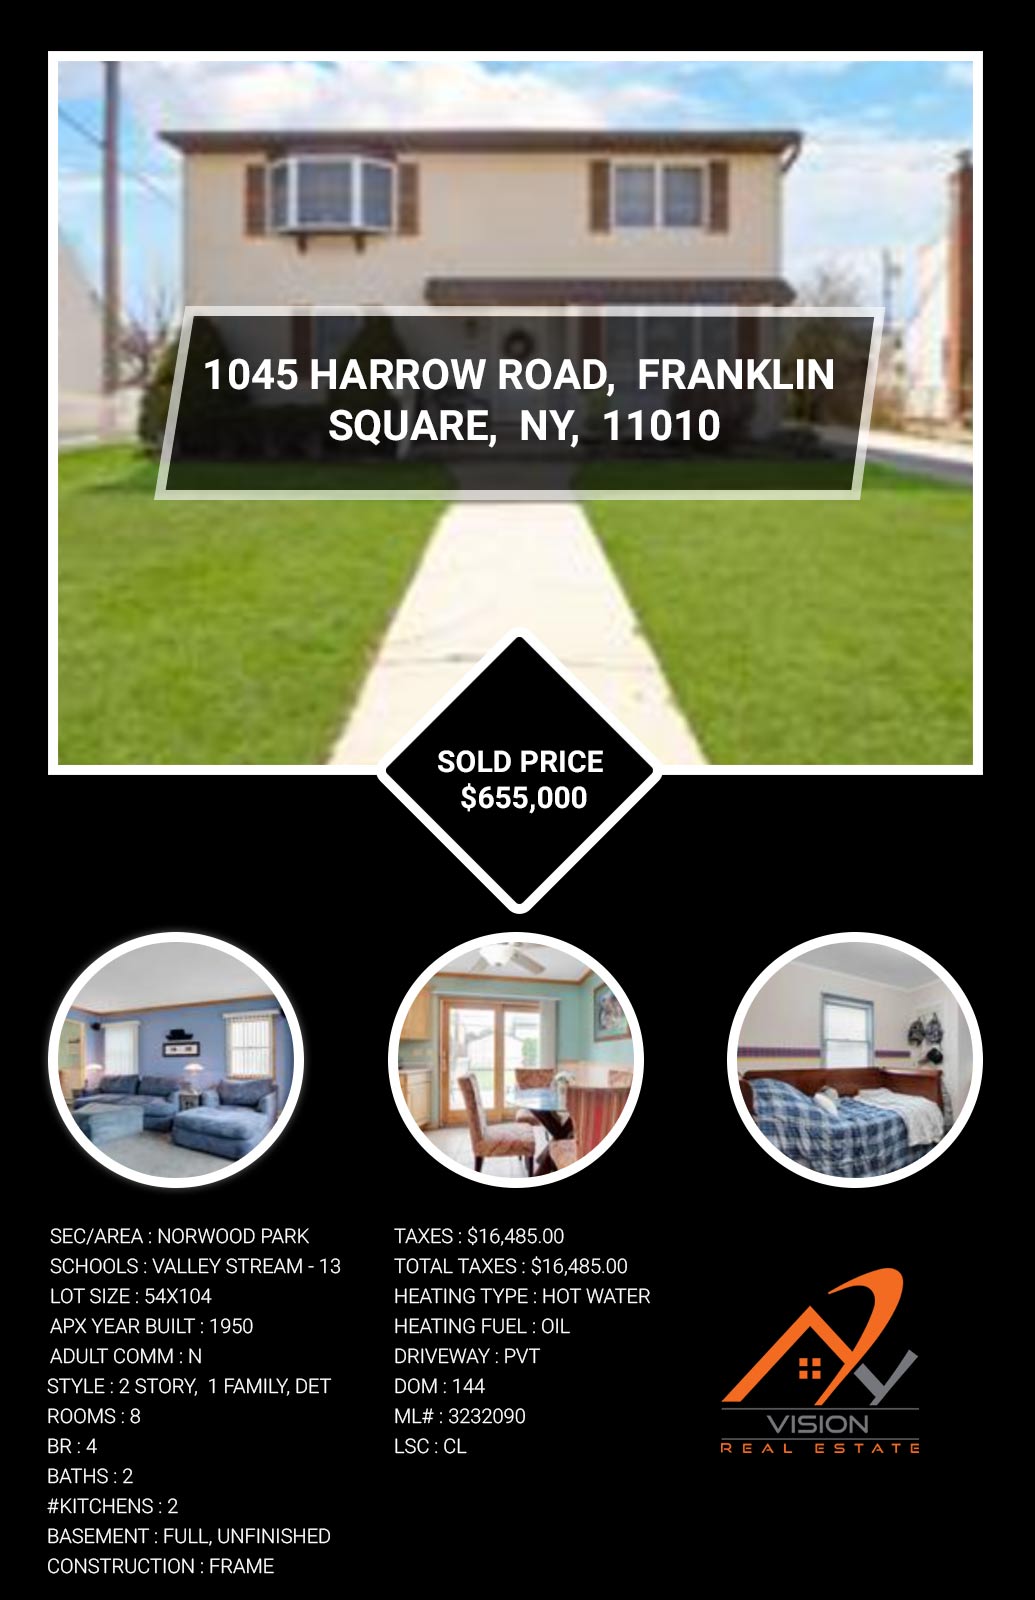 House for Sale Franklyn Square, NY